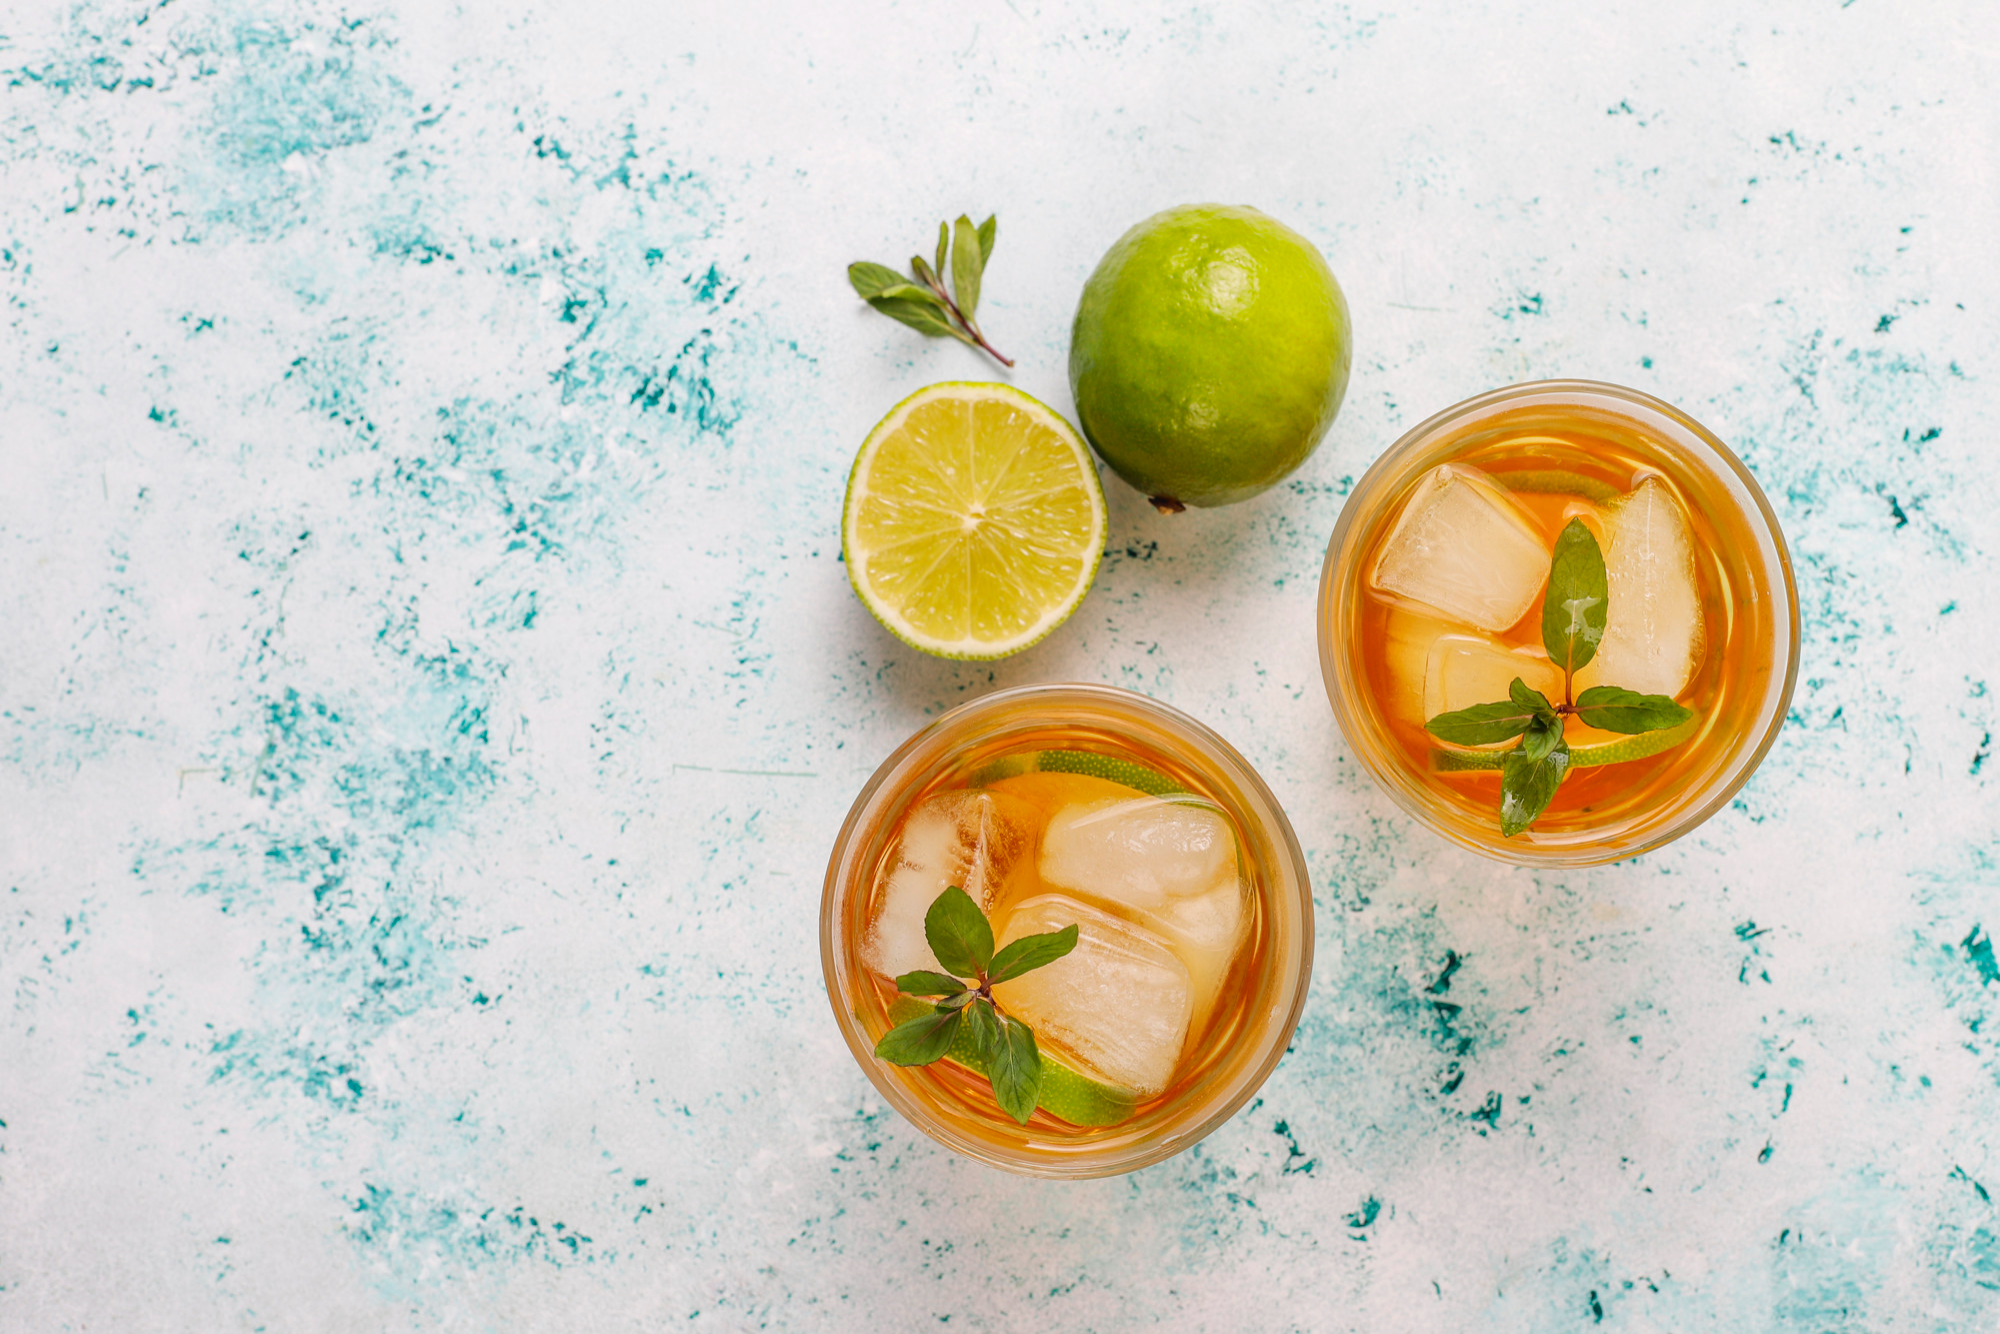 Quench iced tea solutions